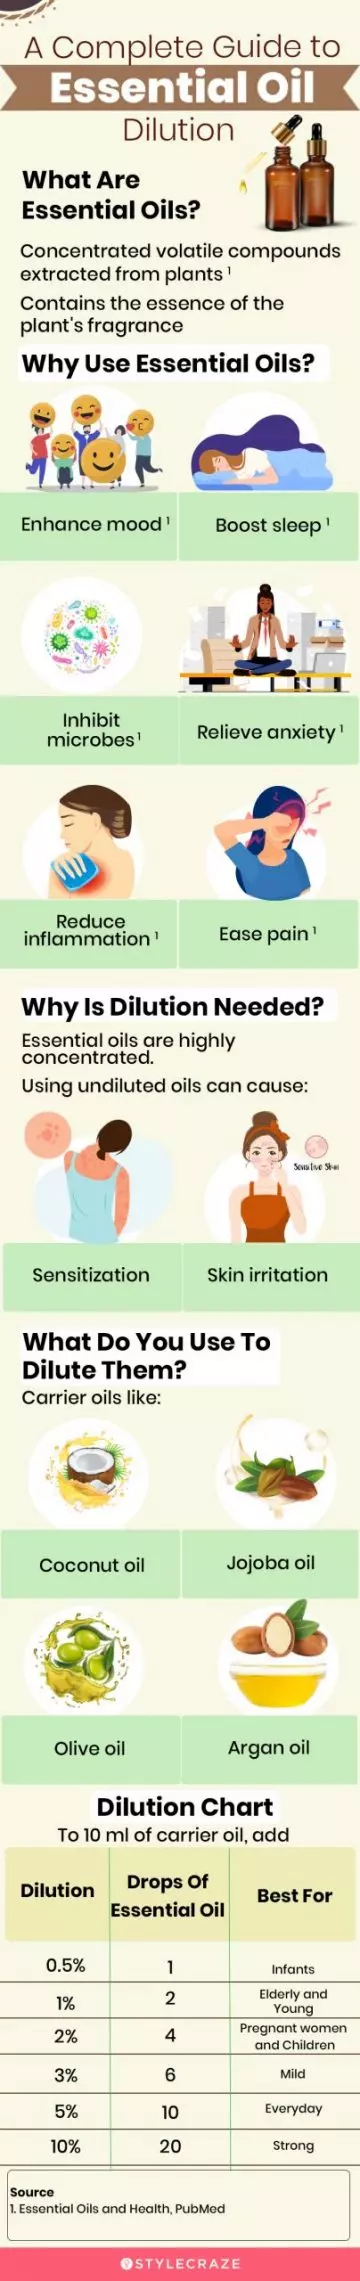 a complete guide to essential oil dilution (infographic)